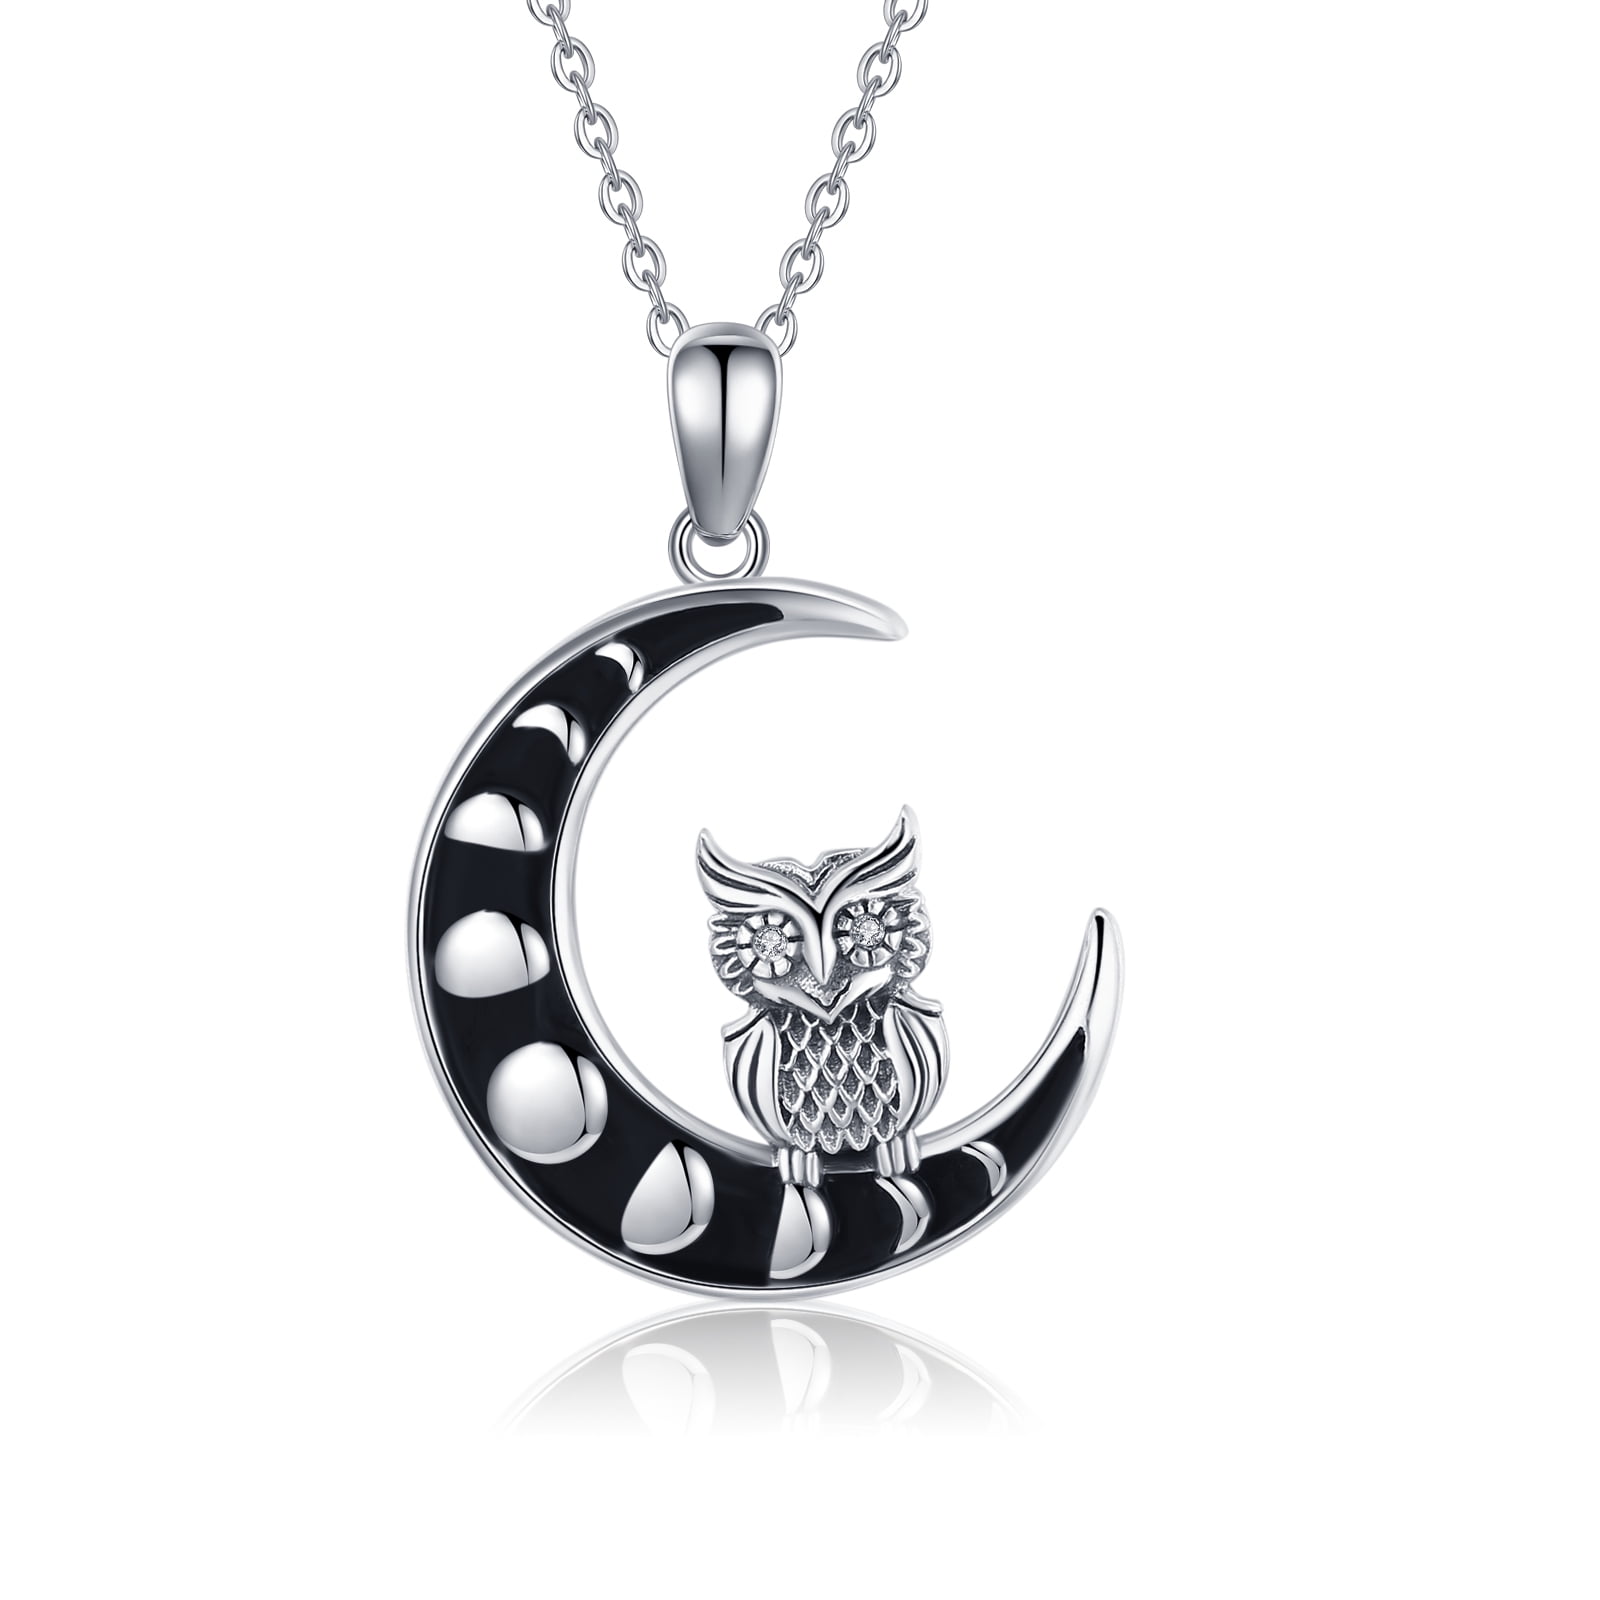 Handmade Silver Moon And Owl Necklace